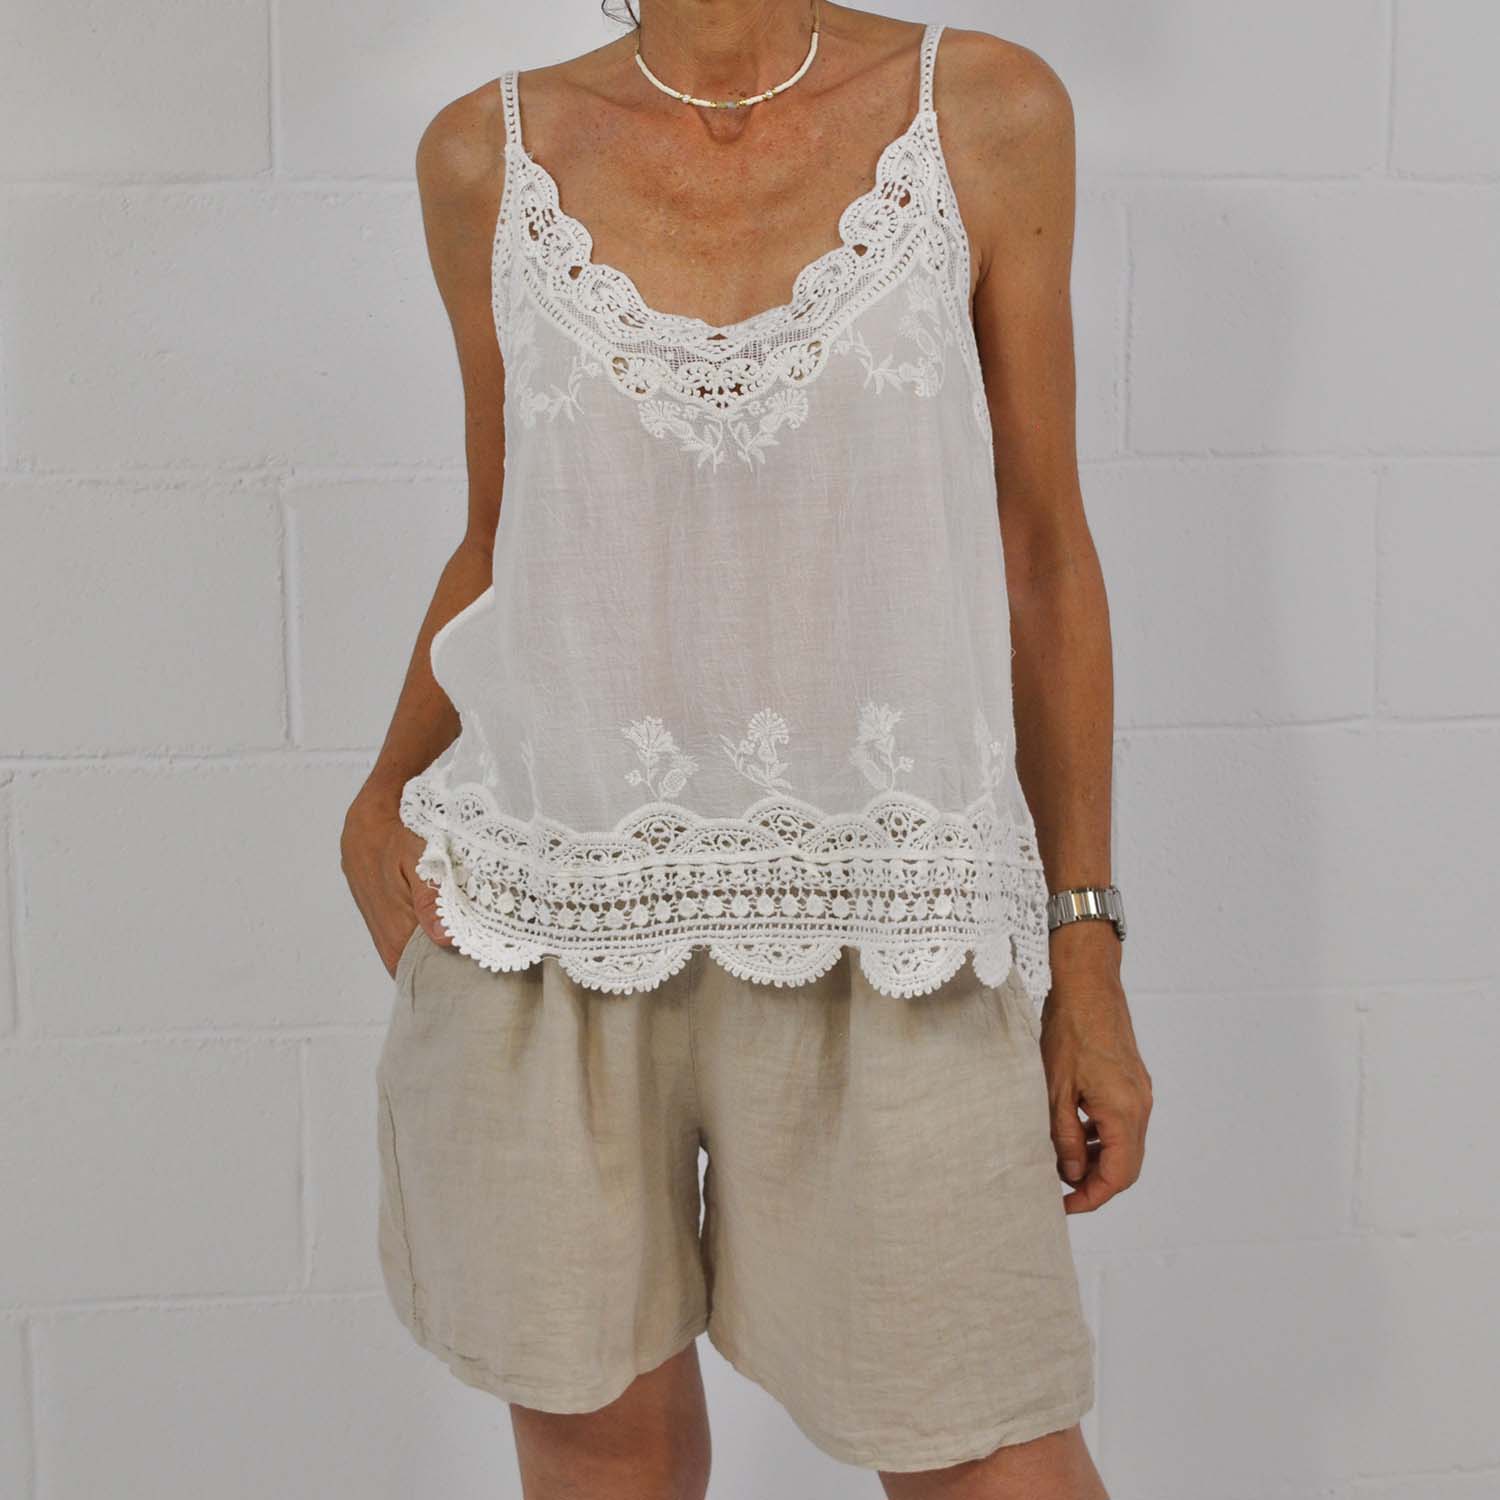 Lace top white